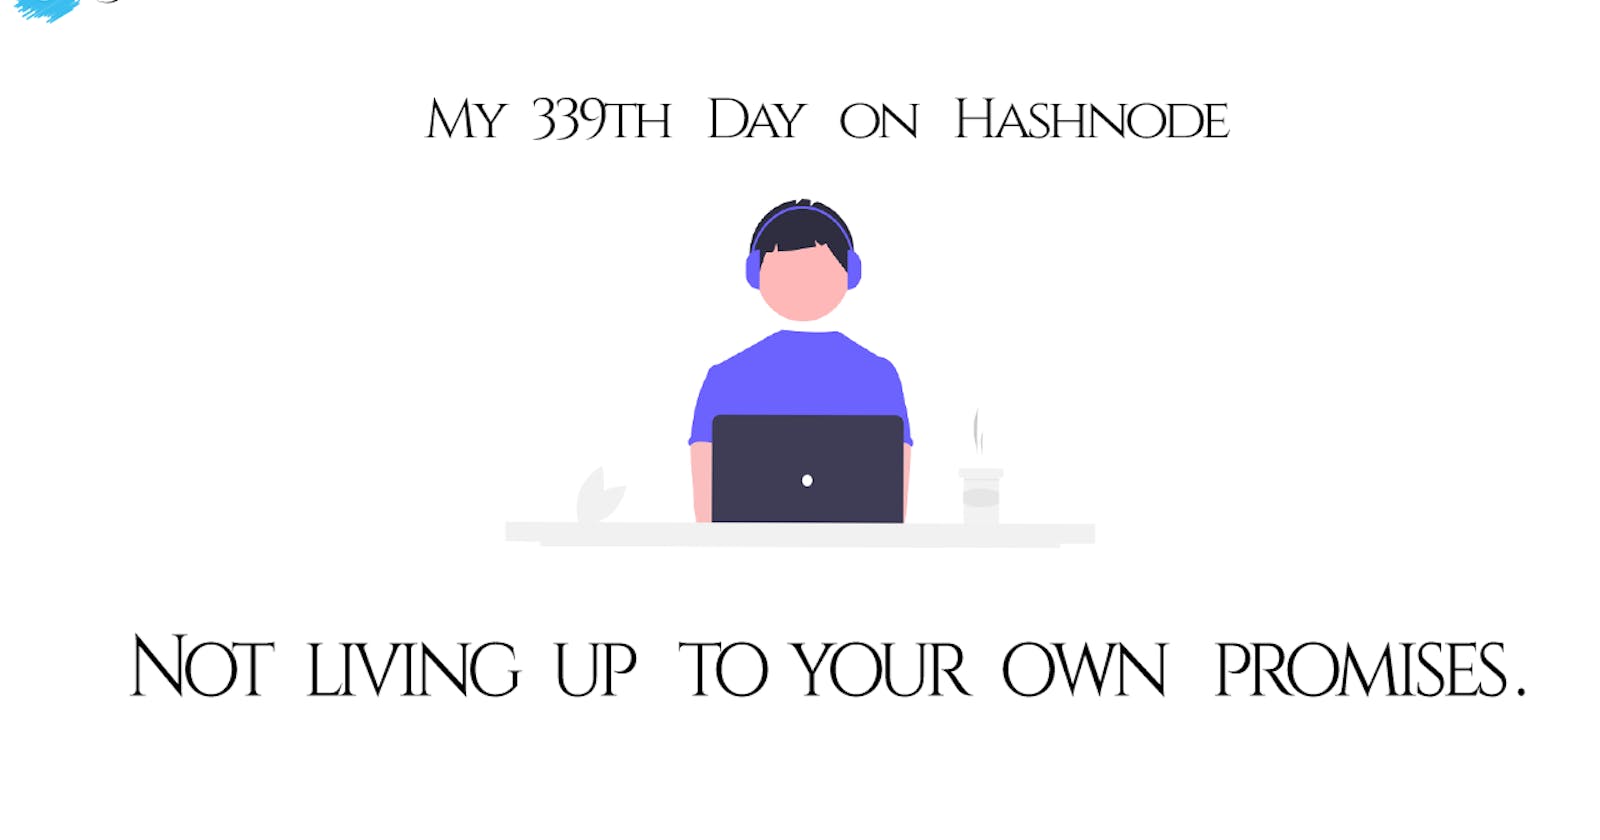 It's my 339th day on Hashnode!